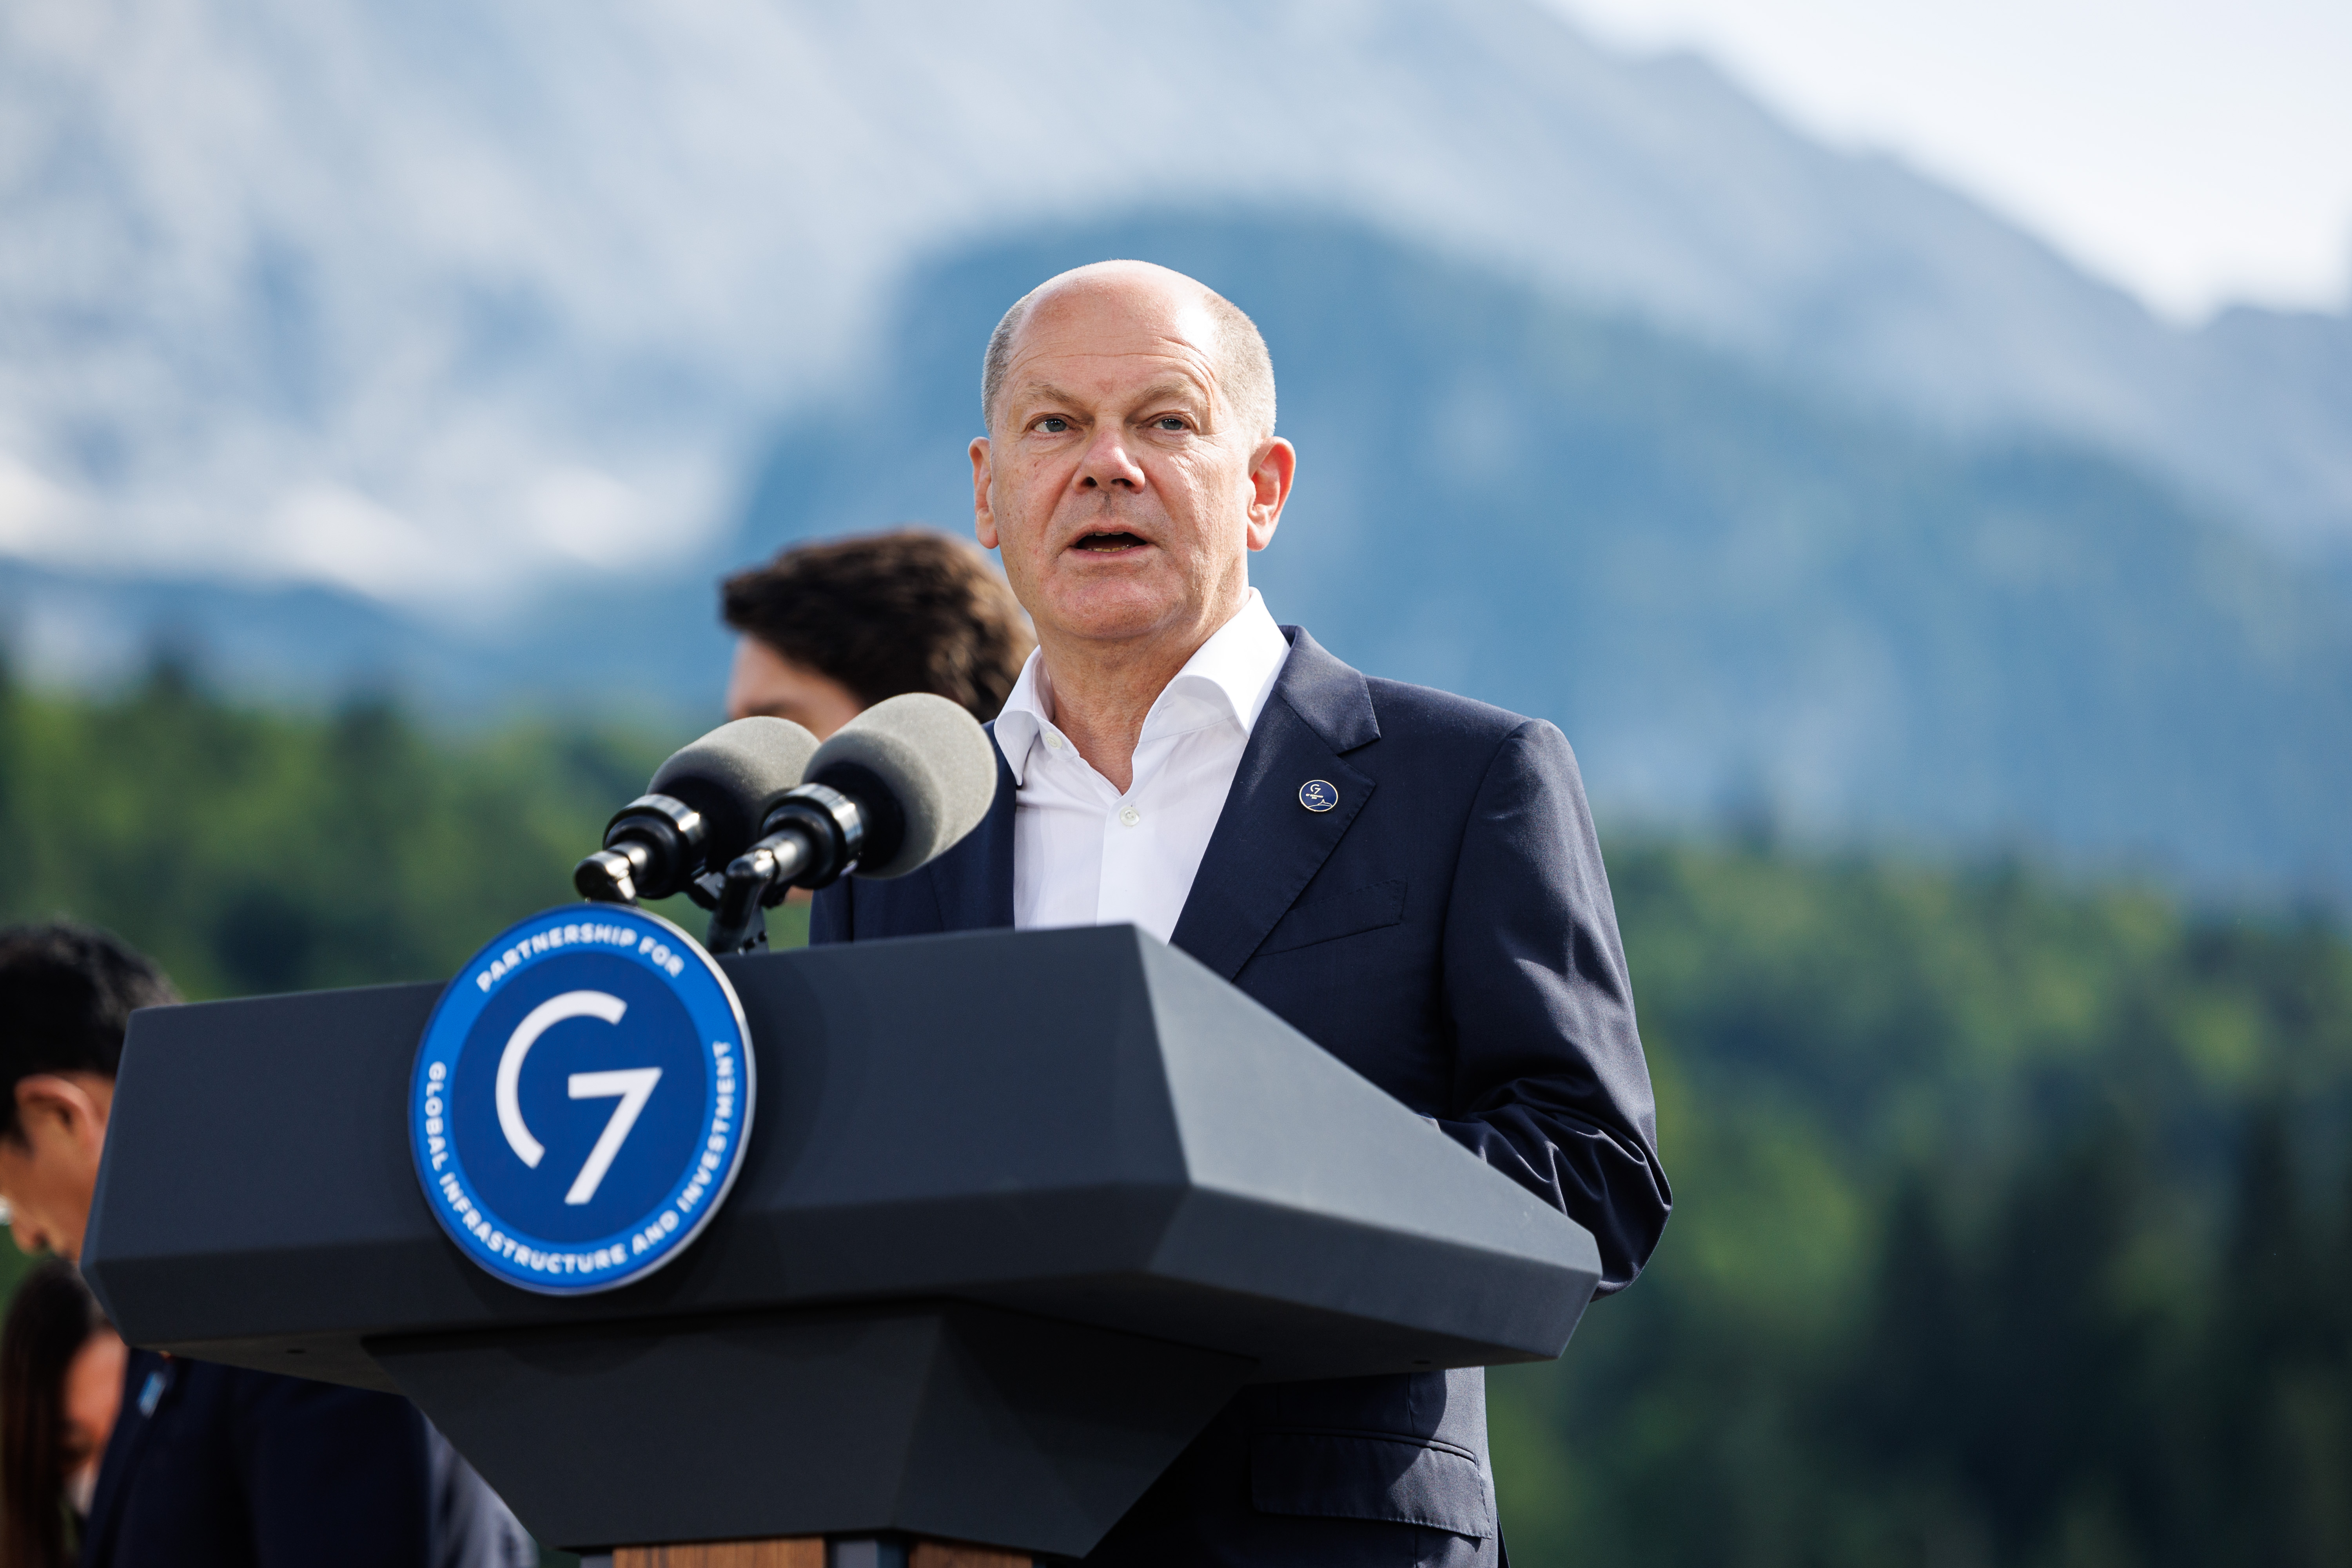 Federal Chancellor Olaf Scholz gives a statement to the press on partnership for global infrastructure and investment.